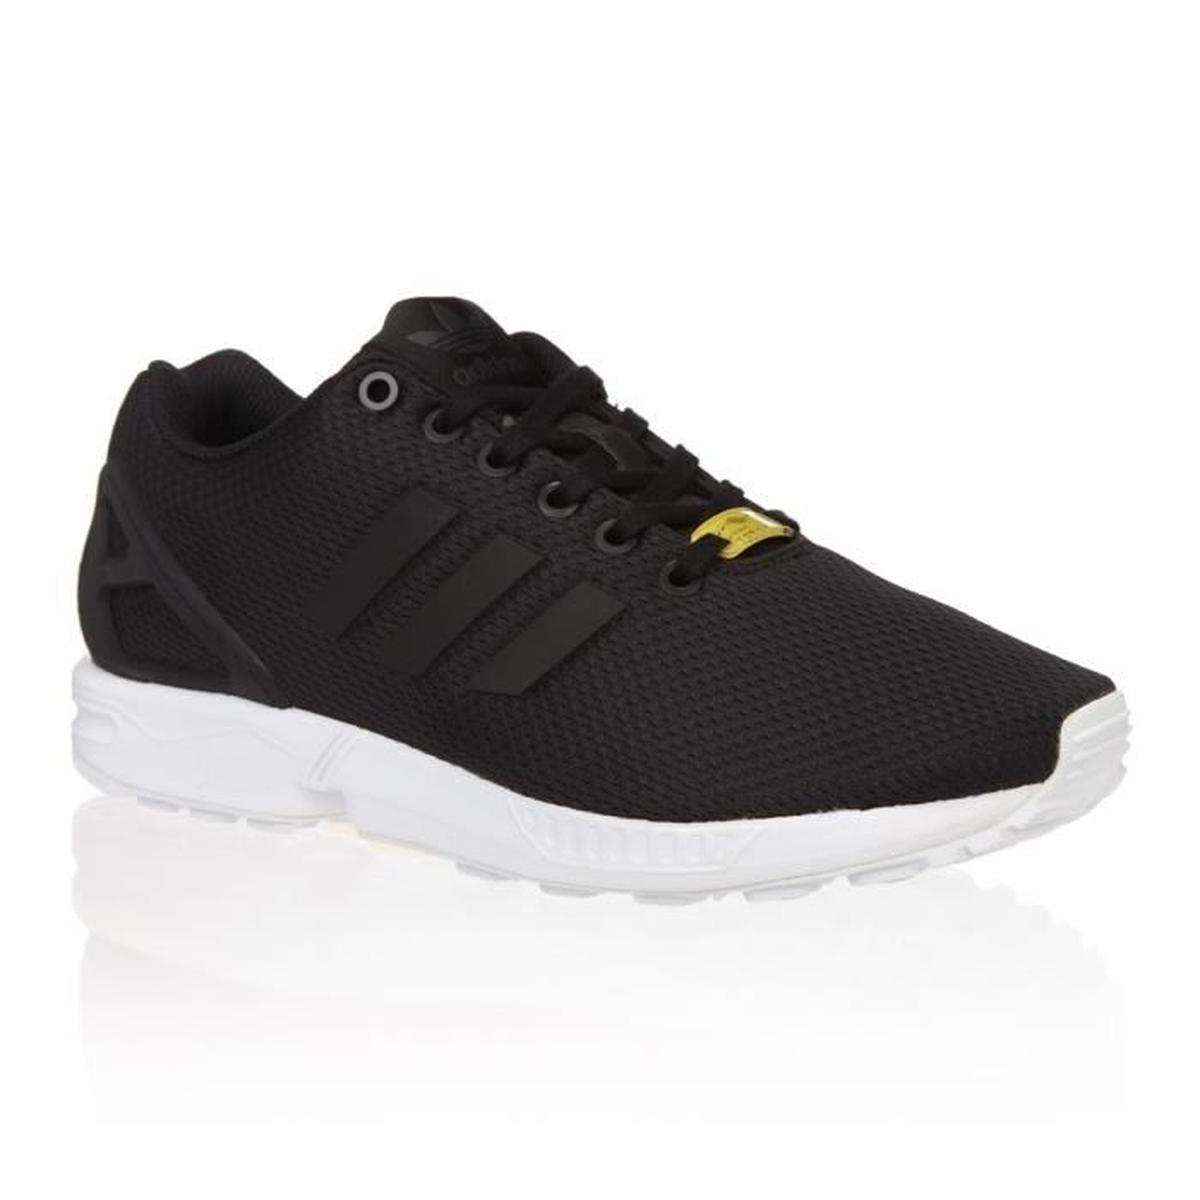 adidas zx flux pas cher taille 41